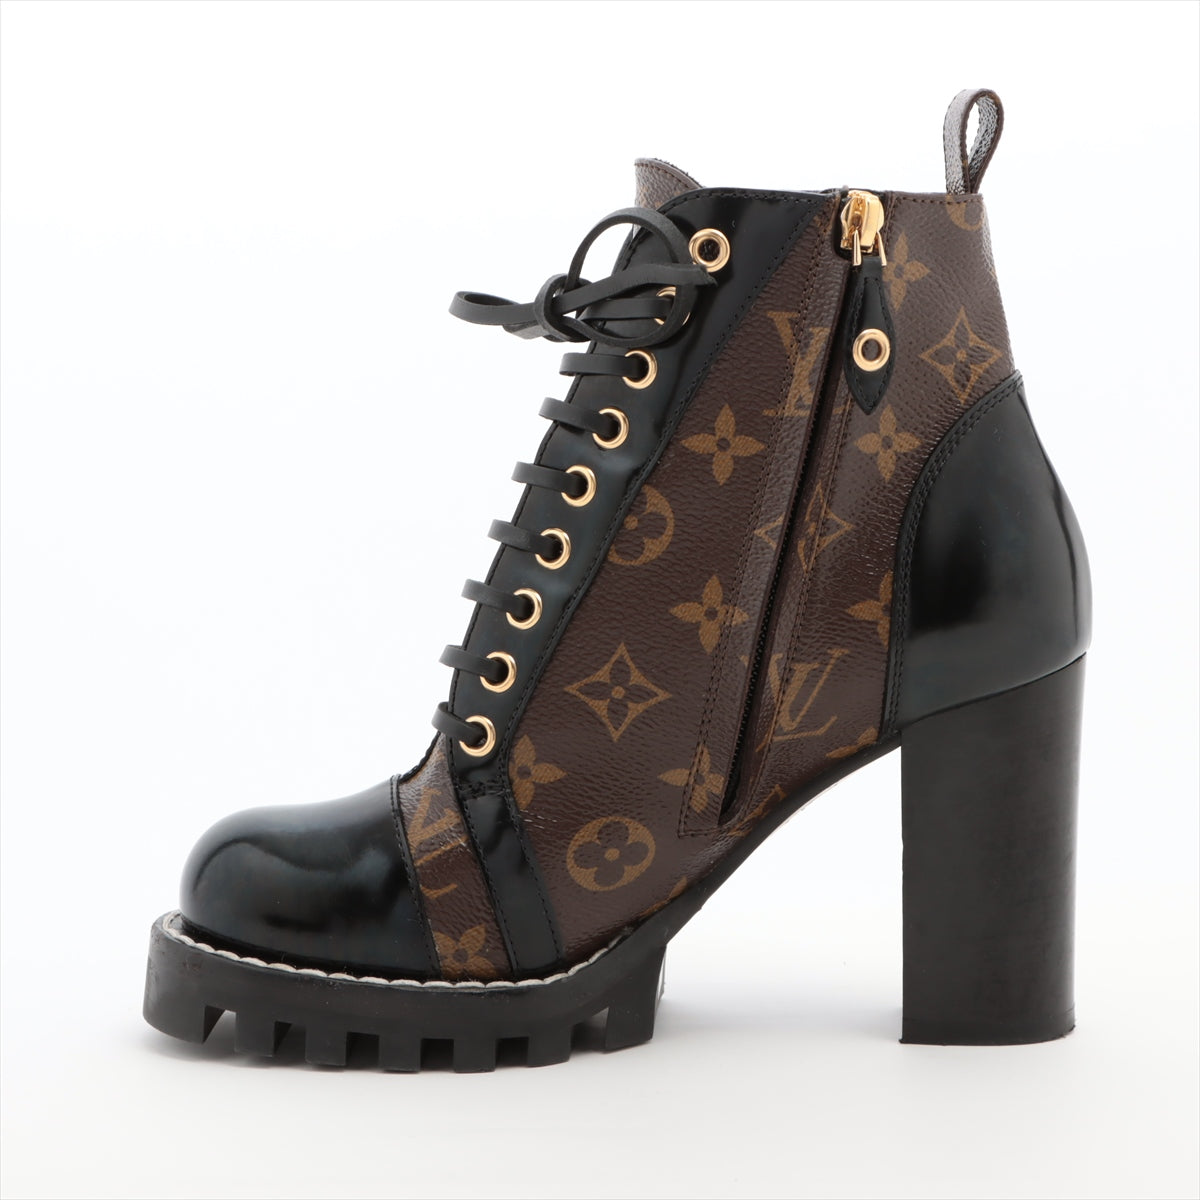 Louis Vuitton Star Trail Line 20 years PVC & leather Short Boots 36 1/2 Ladies' Black × Brown MA1200 Monogram There is a box